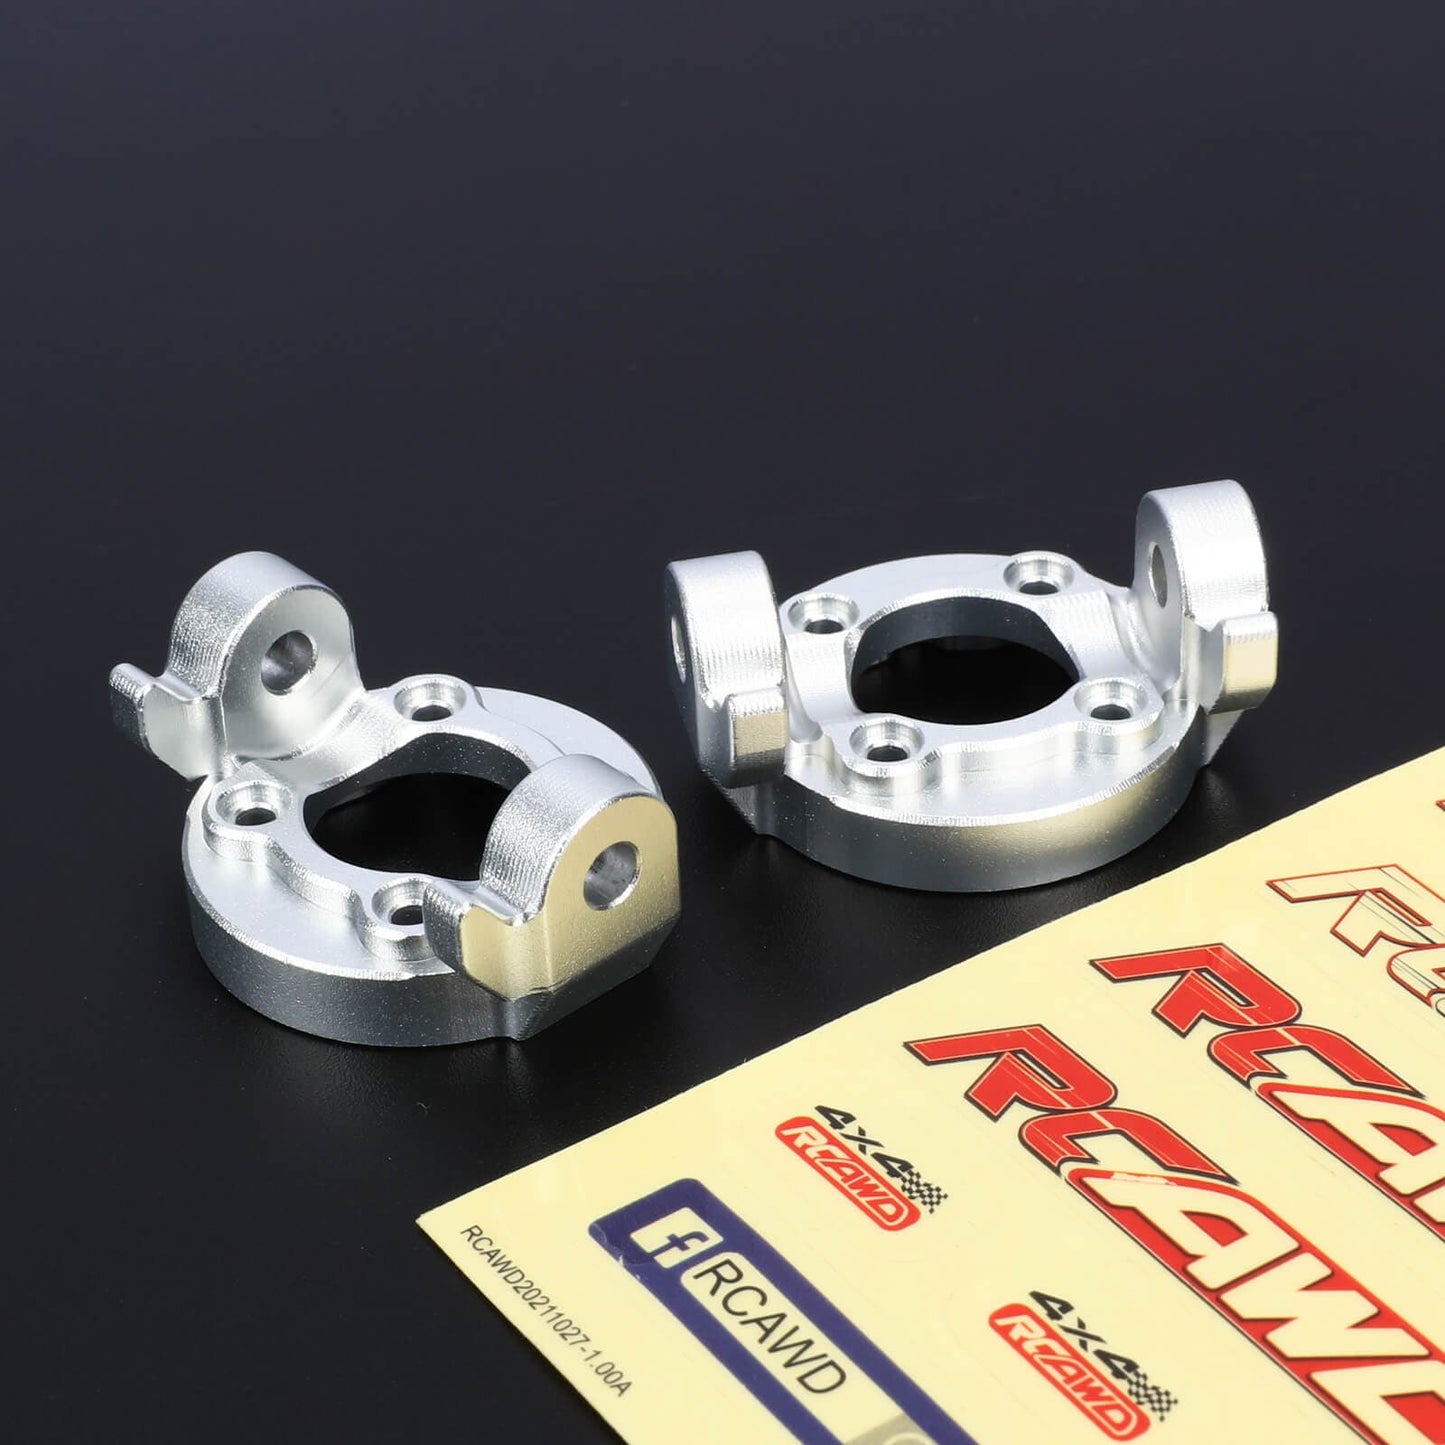 RCAWD LOSI 1/8 LMT Silver / Spindle Carrier Set RCAWD Losi Upgrades Spindle Carrier Set with Spindle Carrier Set for1/8 LMT LOS244003 LOS242052